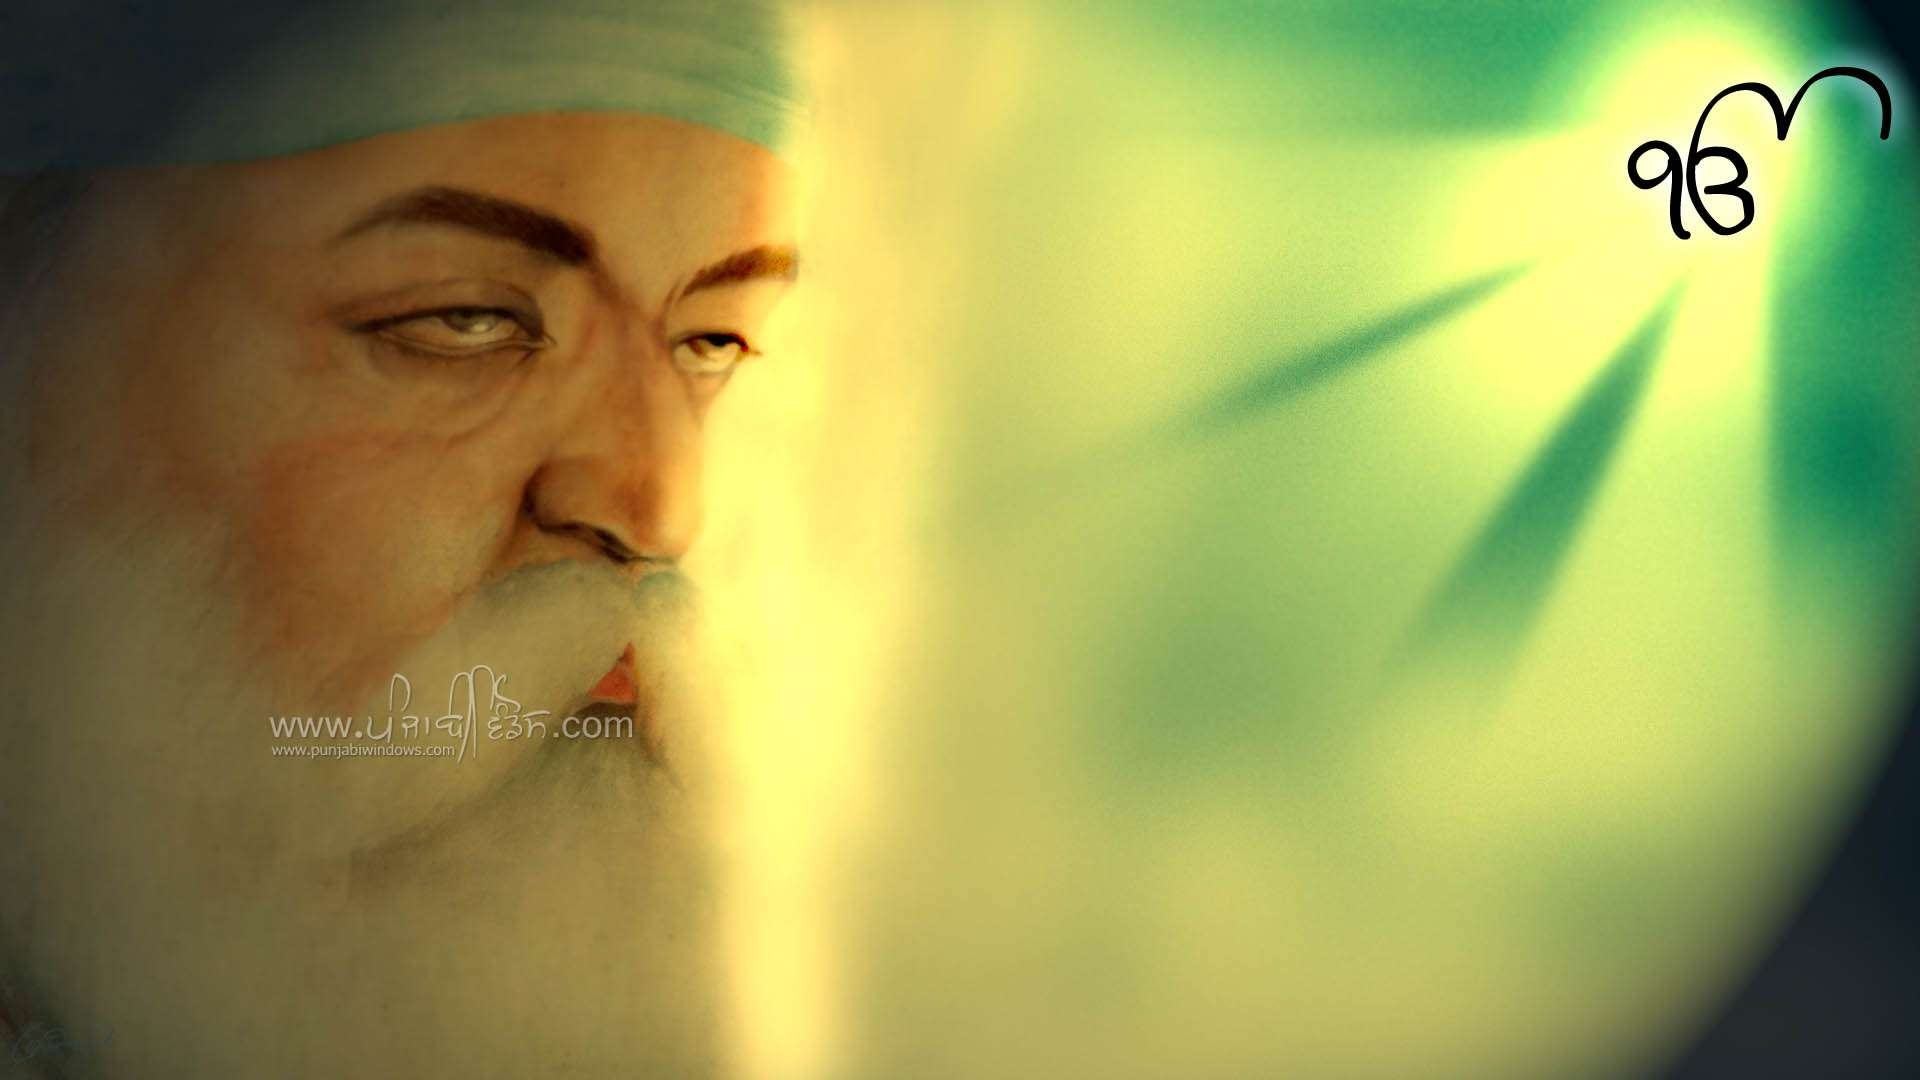 1920x1080 Sikh Guru Picture HD God Images,Wallpapers & Backgrounds SIKH - a